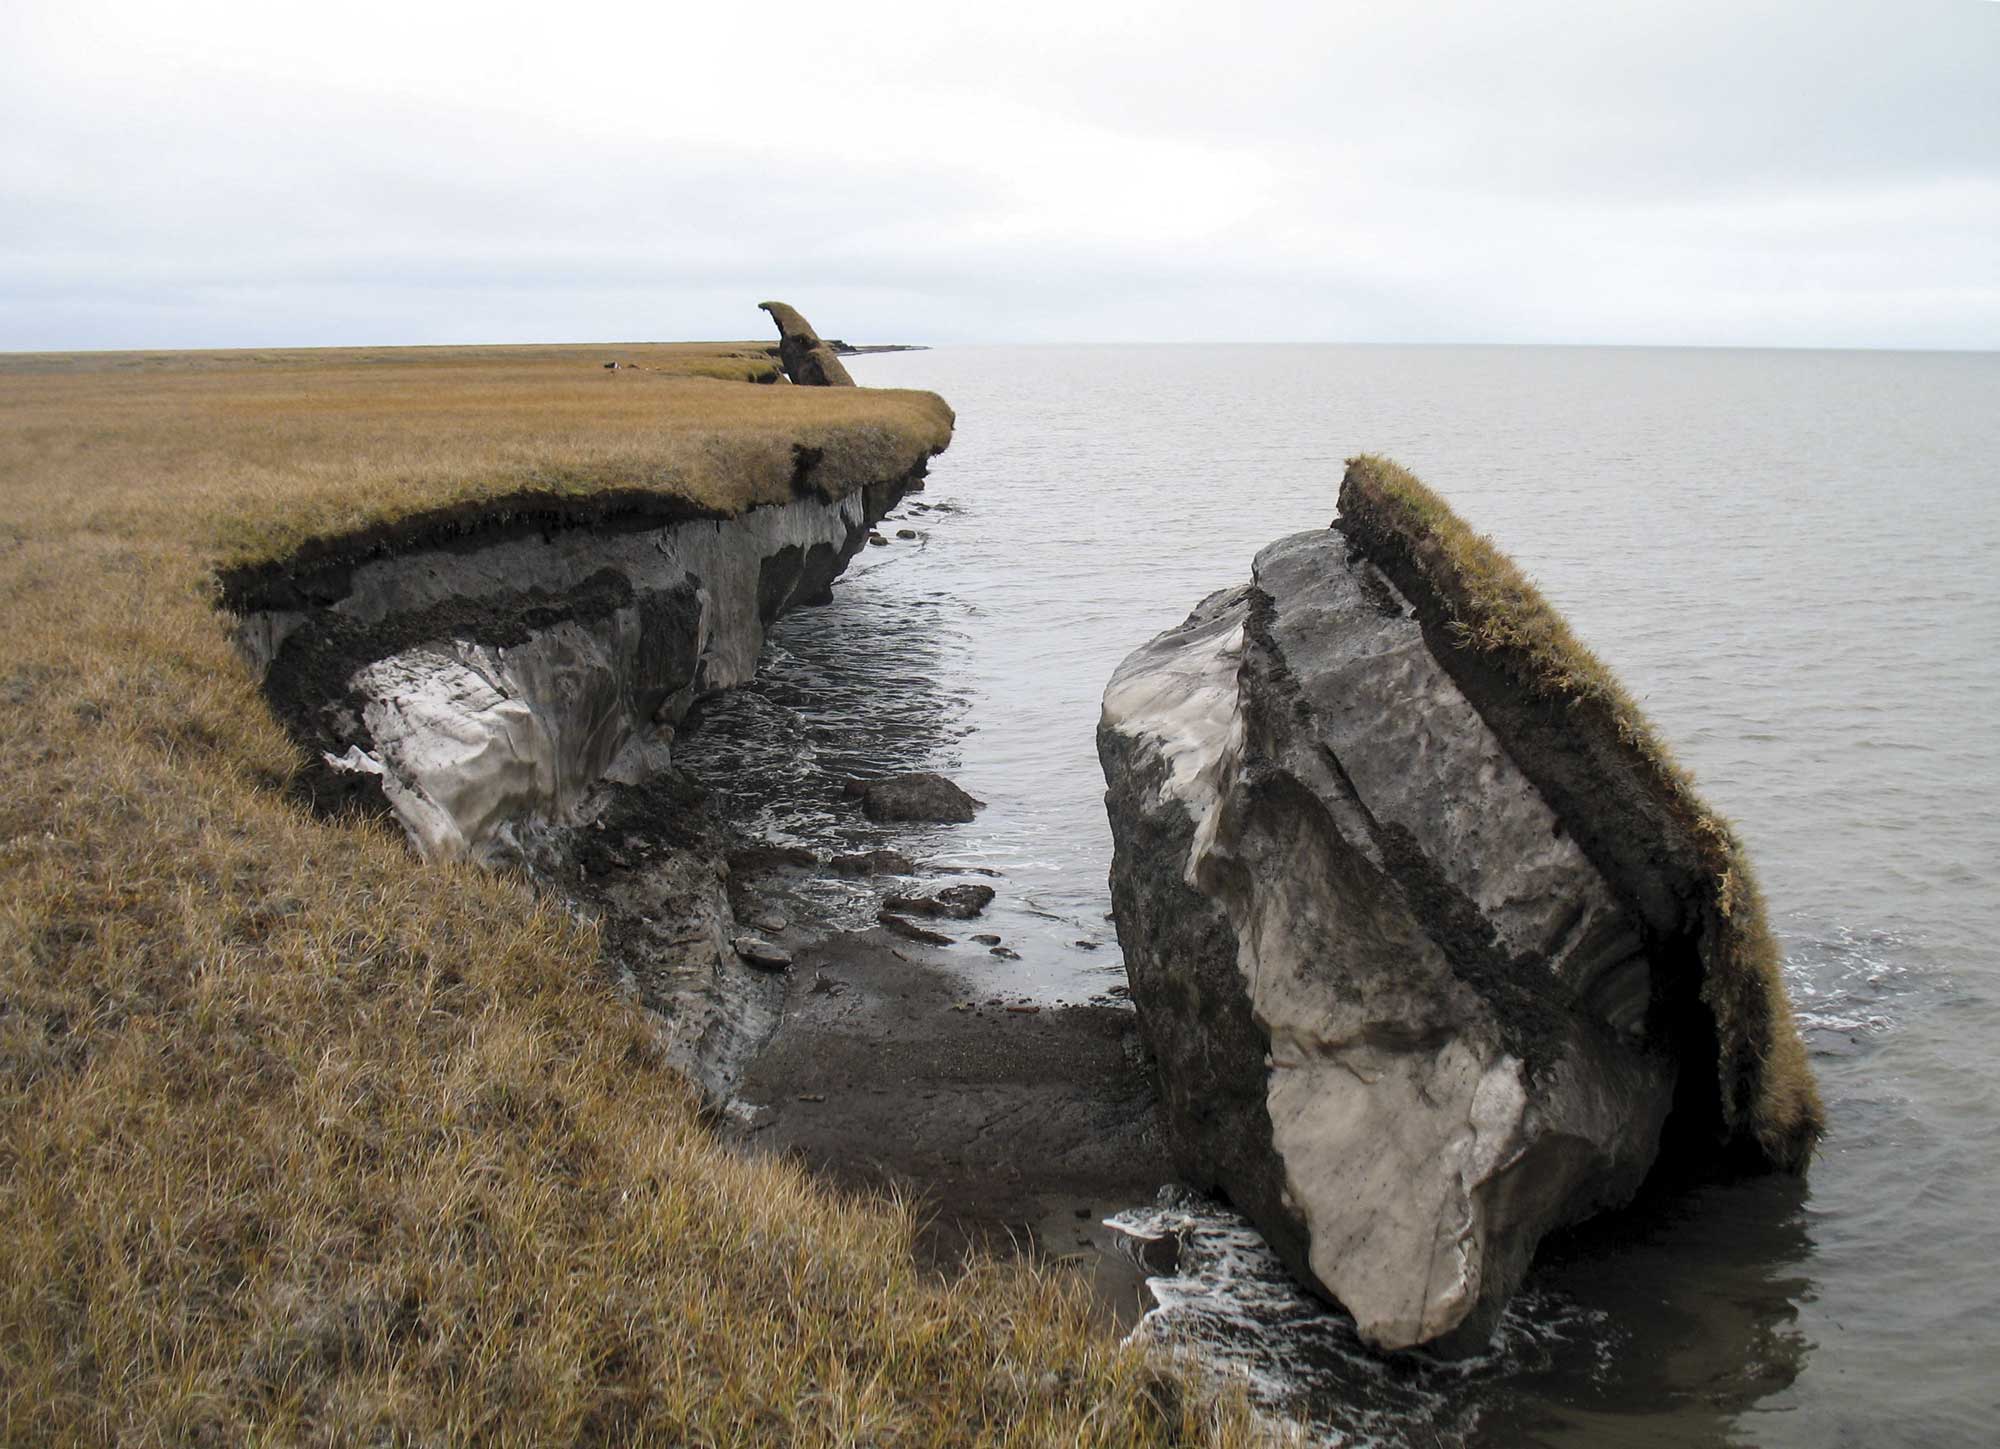 Thawing permafrost can result in the loss of terrain, as seen in this image where part of the coastal bluff along Drew Point, Alaska, has collapsed into the ocean.